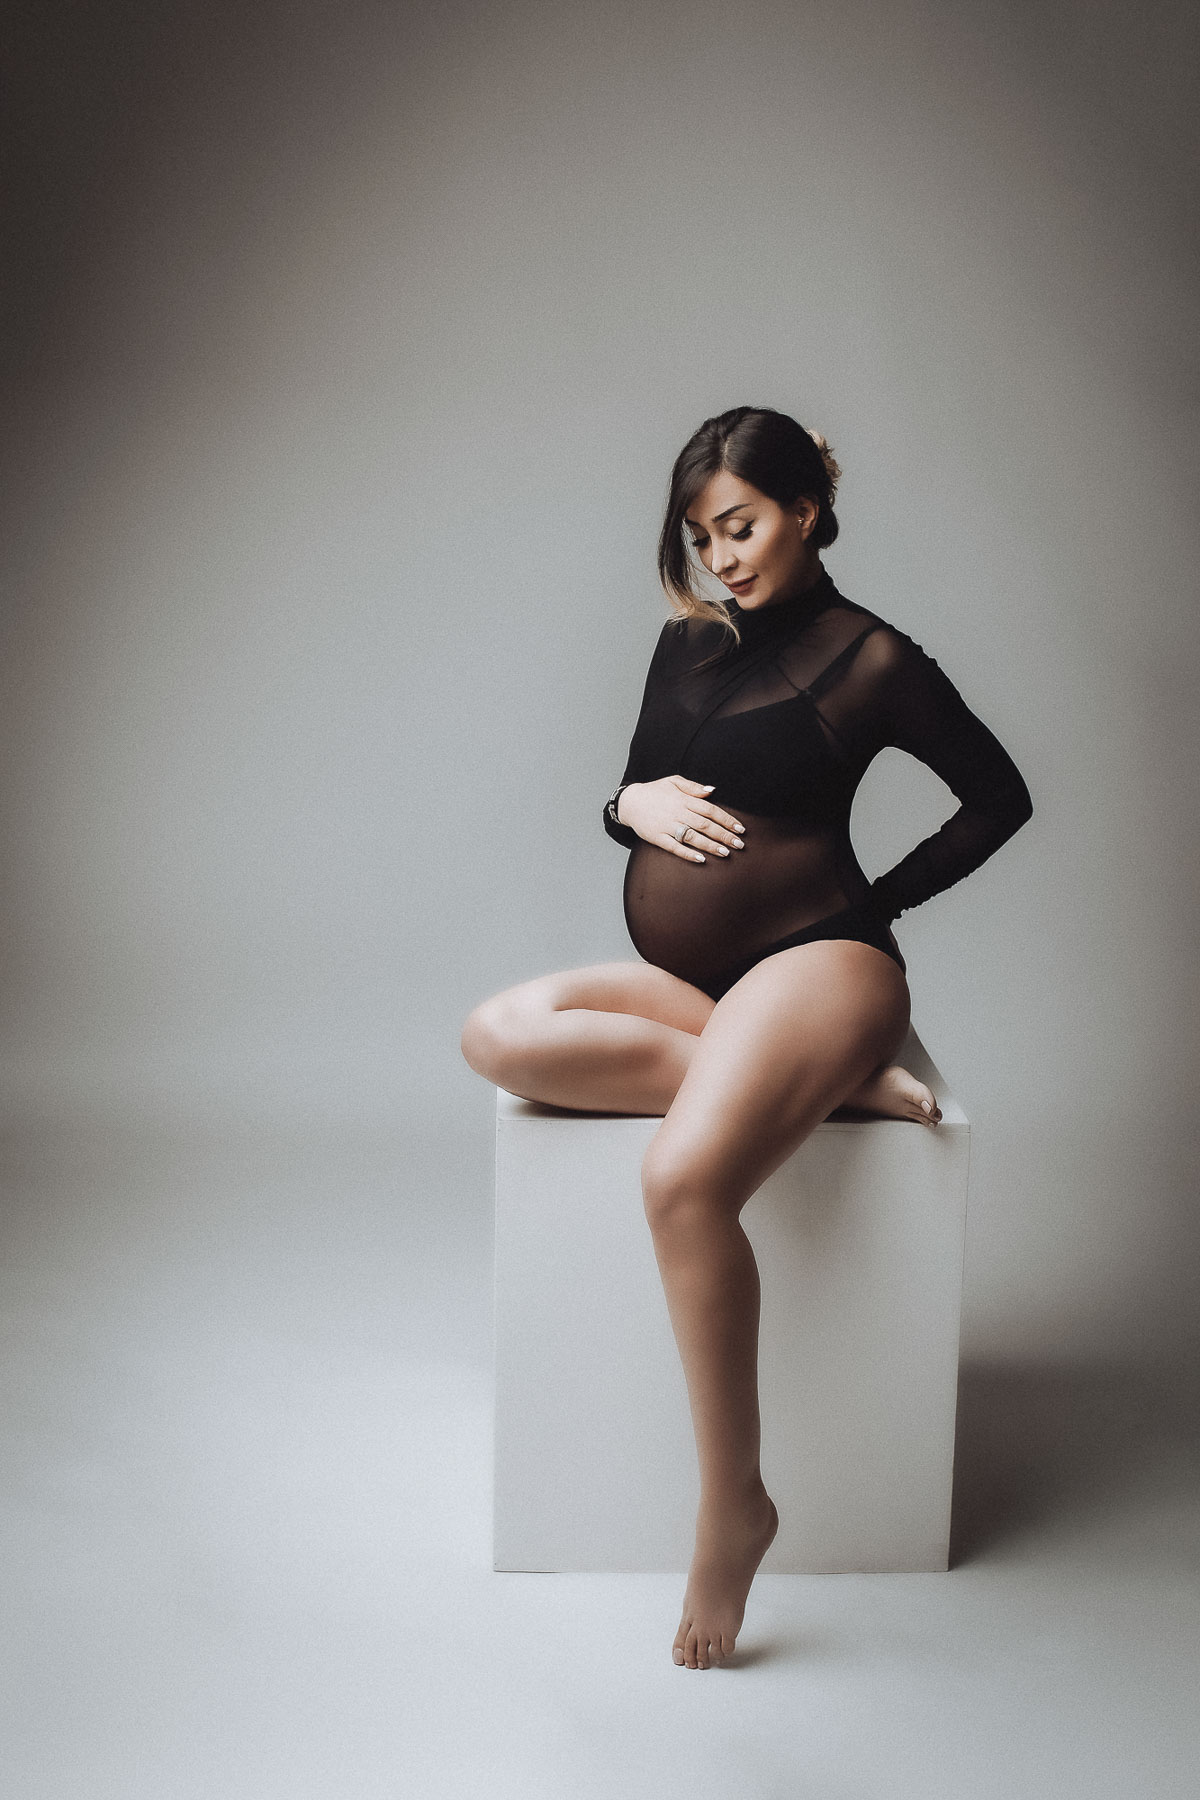 unique maternity photography ideas with poses and pictures